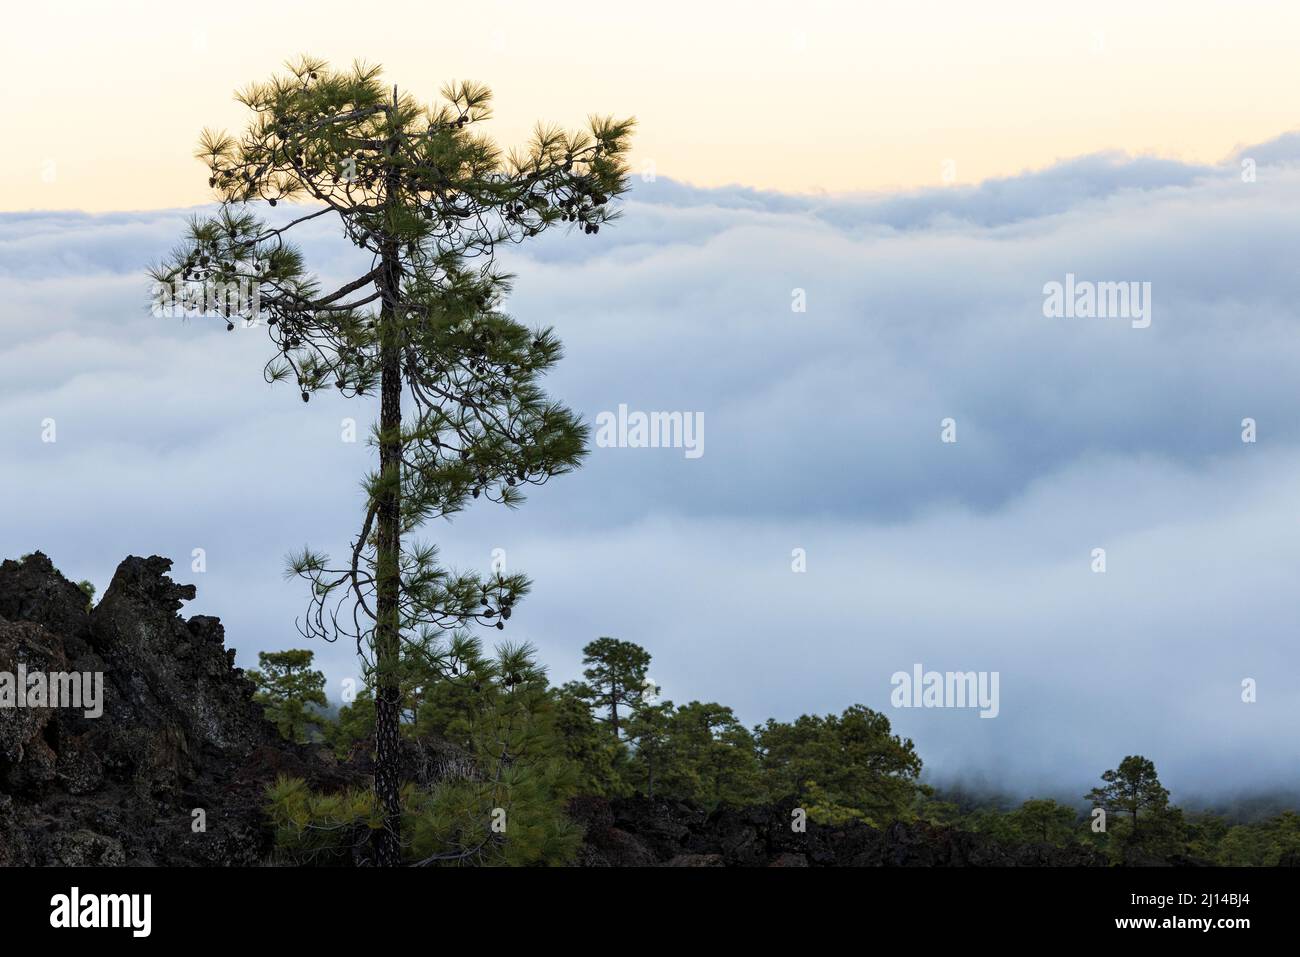 Canarian pine trees, pinus canariensis growing in the solidified lava fields on a cloudy, misty morning in the volcanic landscape of the Las Canadas d Stock Photo